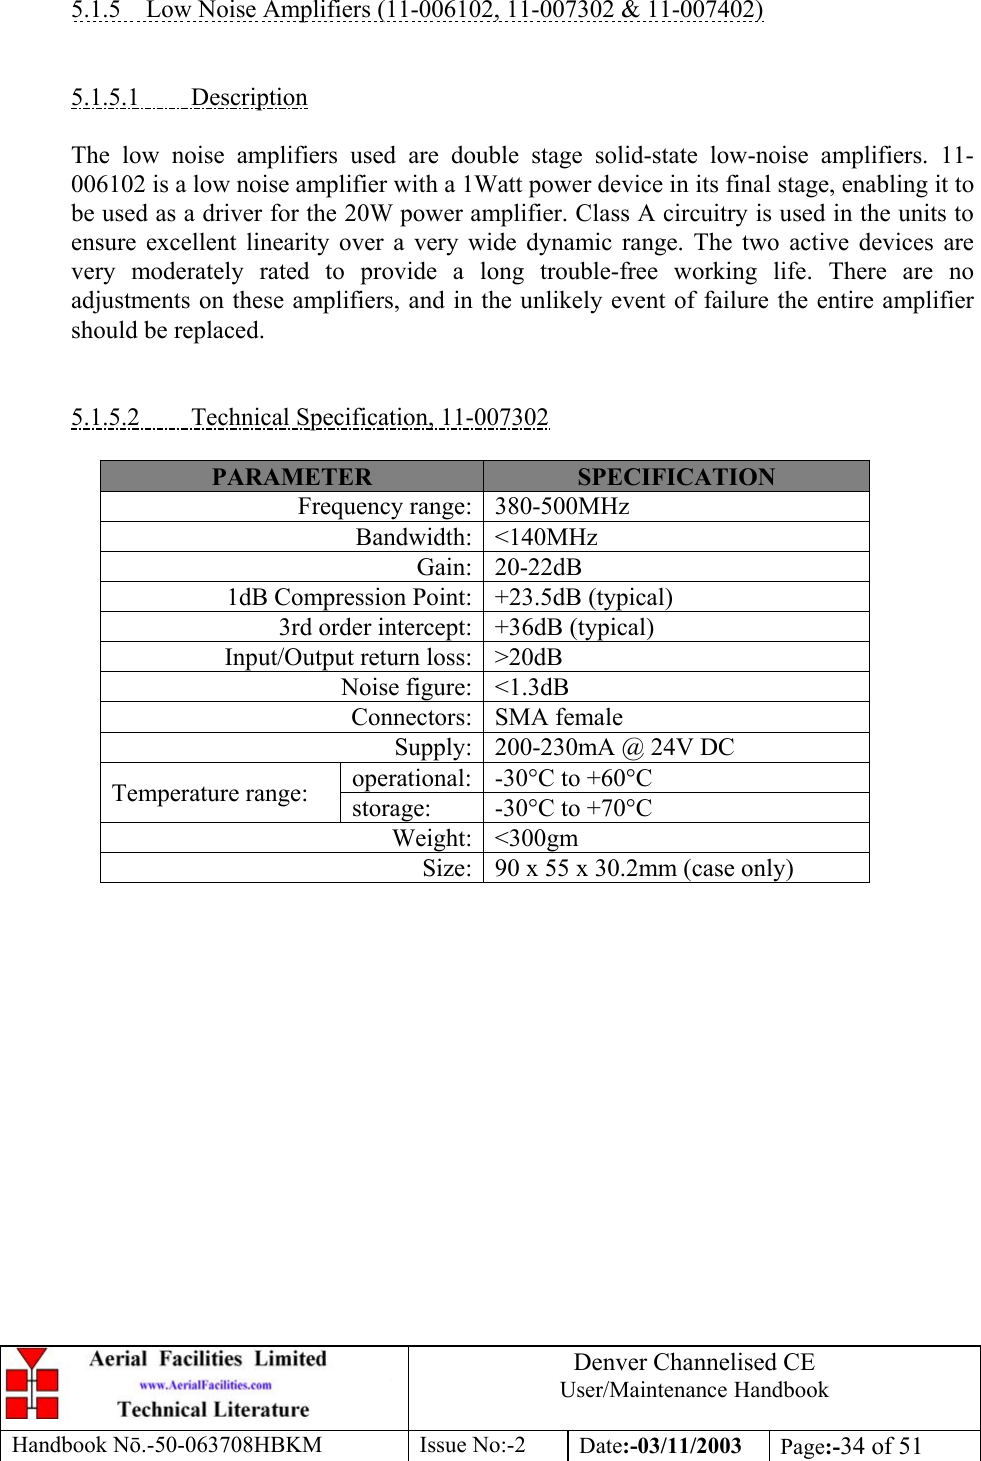 Denver Channelised CEUser/Maintenance HandbookHandbook Nō.-50-063708HBKM Issue No:-2 Date:-03/11/2003 Page:-34 of 515.1.5    Low Noise Amplifiers (11-006102, 11-007302 &amp; 11-007402)5.1.5.1         DescriptionThe low noise amplifiers used are double stage solid-state low-noise amplifiers. 11-006102 is a low noise amplifier with a 1Watt power device in its final stage, enabling it tobe used as a driver for the 20W power amplifier. Class A circuitry is used in the units toensure excellent linearity over a very wide dynamic range. The two active devices arevery moderately rated to provide a long trouble-free working life. There are noadjustments on these amplifiers, and in the unlikely event of failure the entire amplifiershould be replaced.5.1.5.2         Technical Specification, 11-007302PARAMETER SPECIFICATIONFrequency range: 380-500MHzBandwidth: &lt;140MHzGain: 20-22dB1dB Compression Point: +23.5dB (typical)3rd order intercept: +36dB (typical)Input/Output return loss: &gt;20dBNoise figure: &lt;1.3dBConnectors: SMA femaleSupply: 200-230mA @ 24V DCoperational: -30°C to +60°CTemperature range: storage: -30°C to +70°CWeight: &lt;300gmSize: 90 x 55 x 30.2mm (case only)